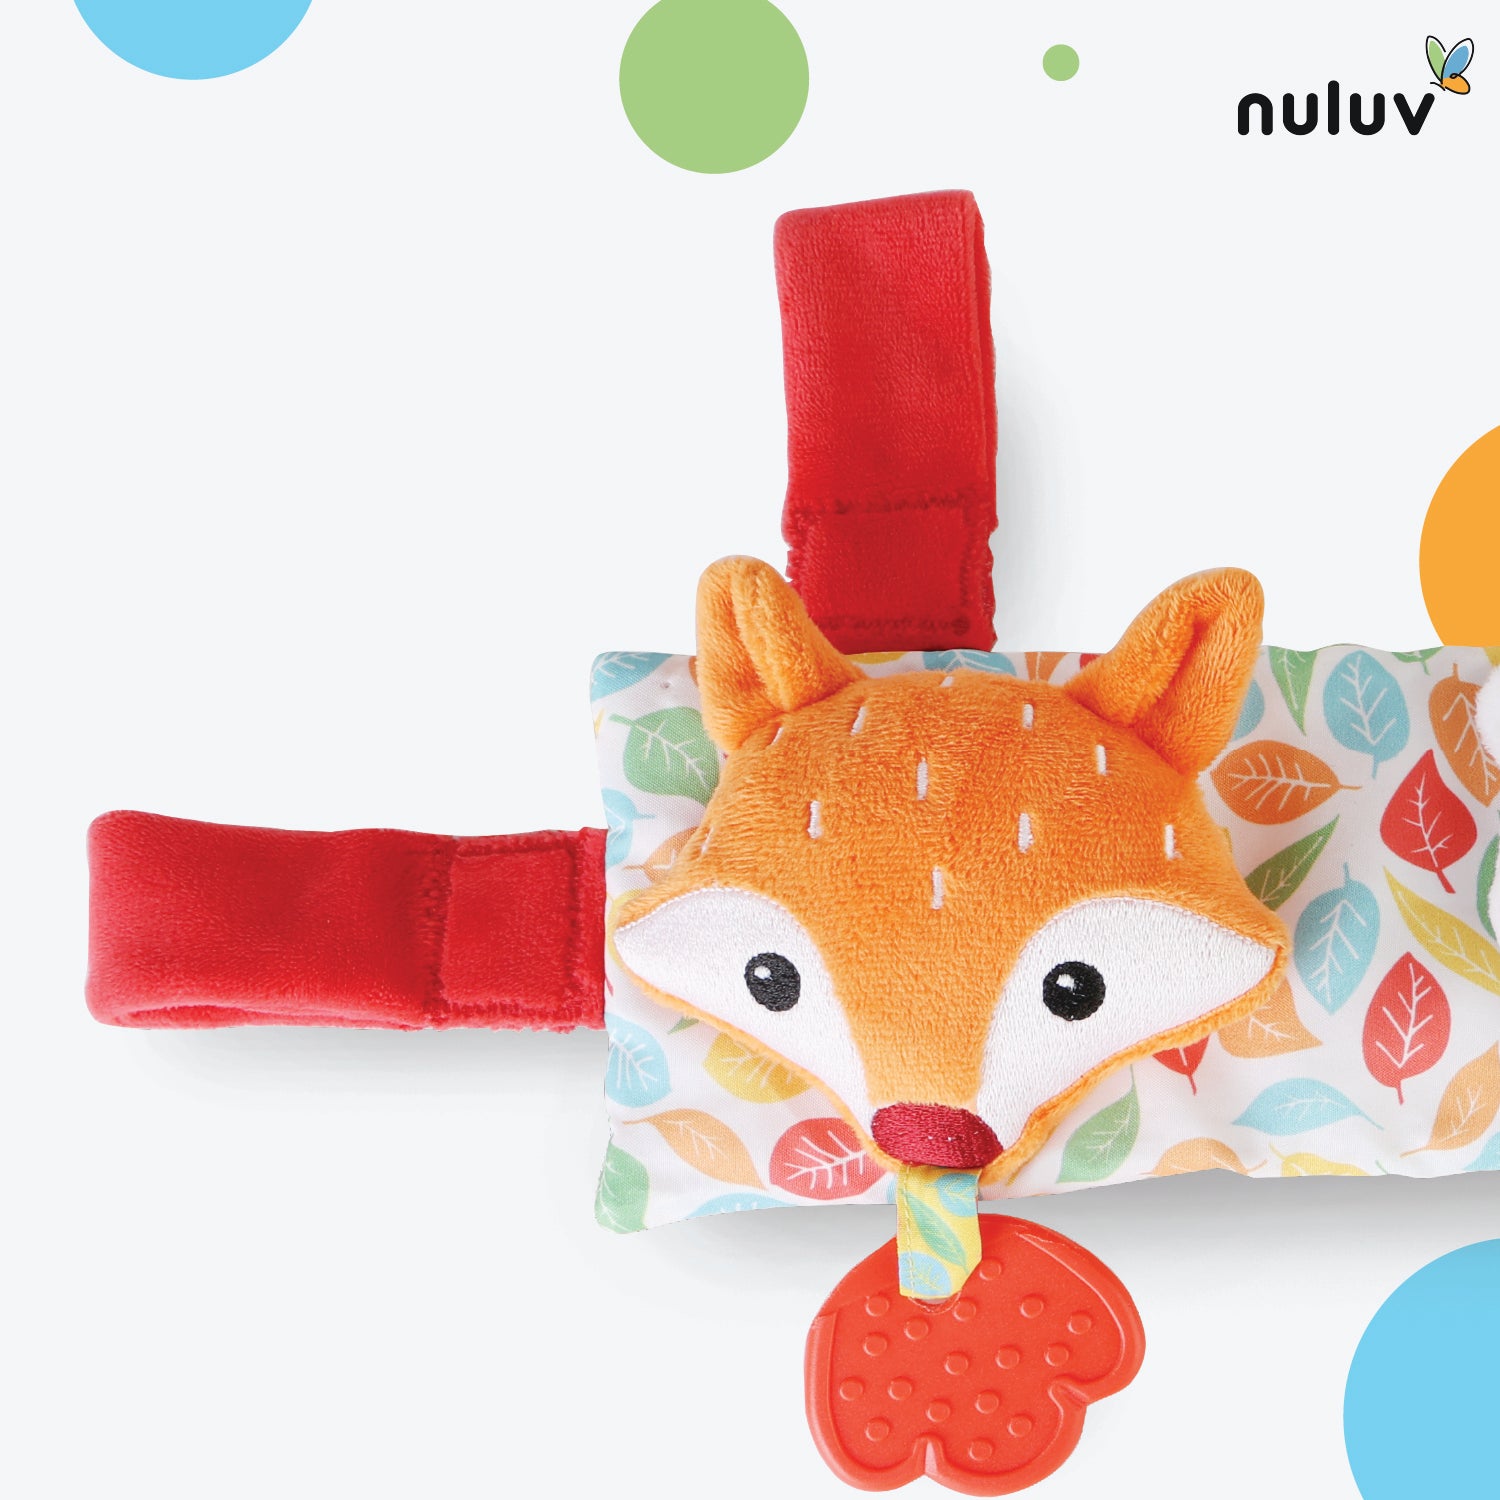 Nuluv Stroller-Cot Plush Toy, Rattle Toys For Crib, Pram, For 0-12 Months